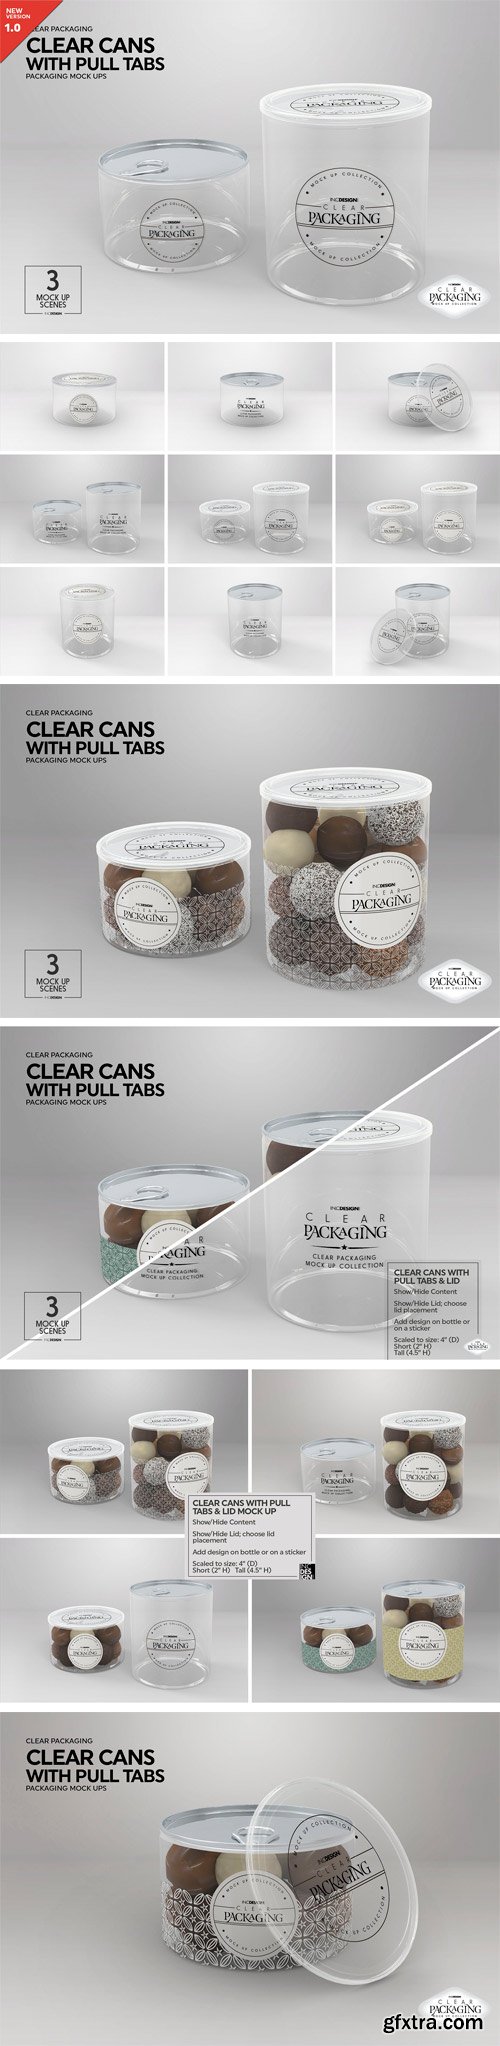 CM - Clear Cans with Pull Tabs Mock Up 2218686